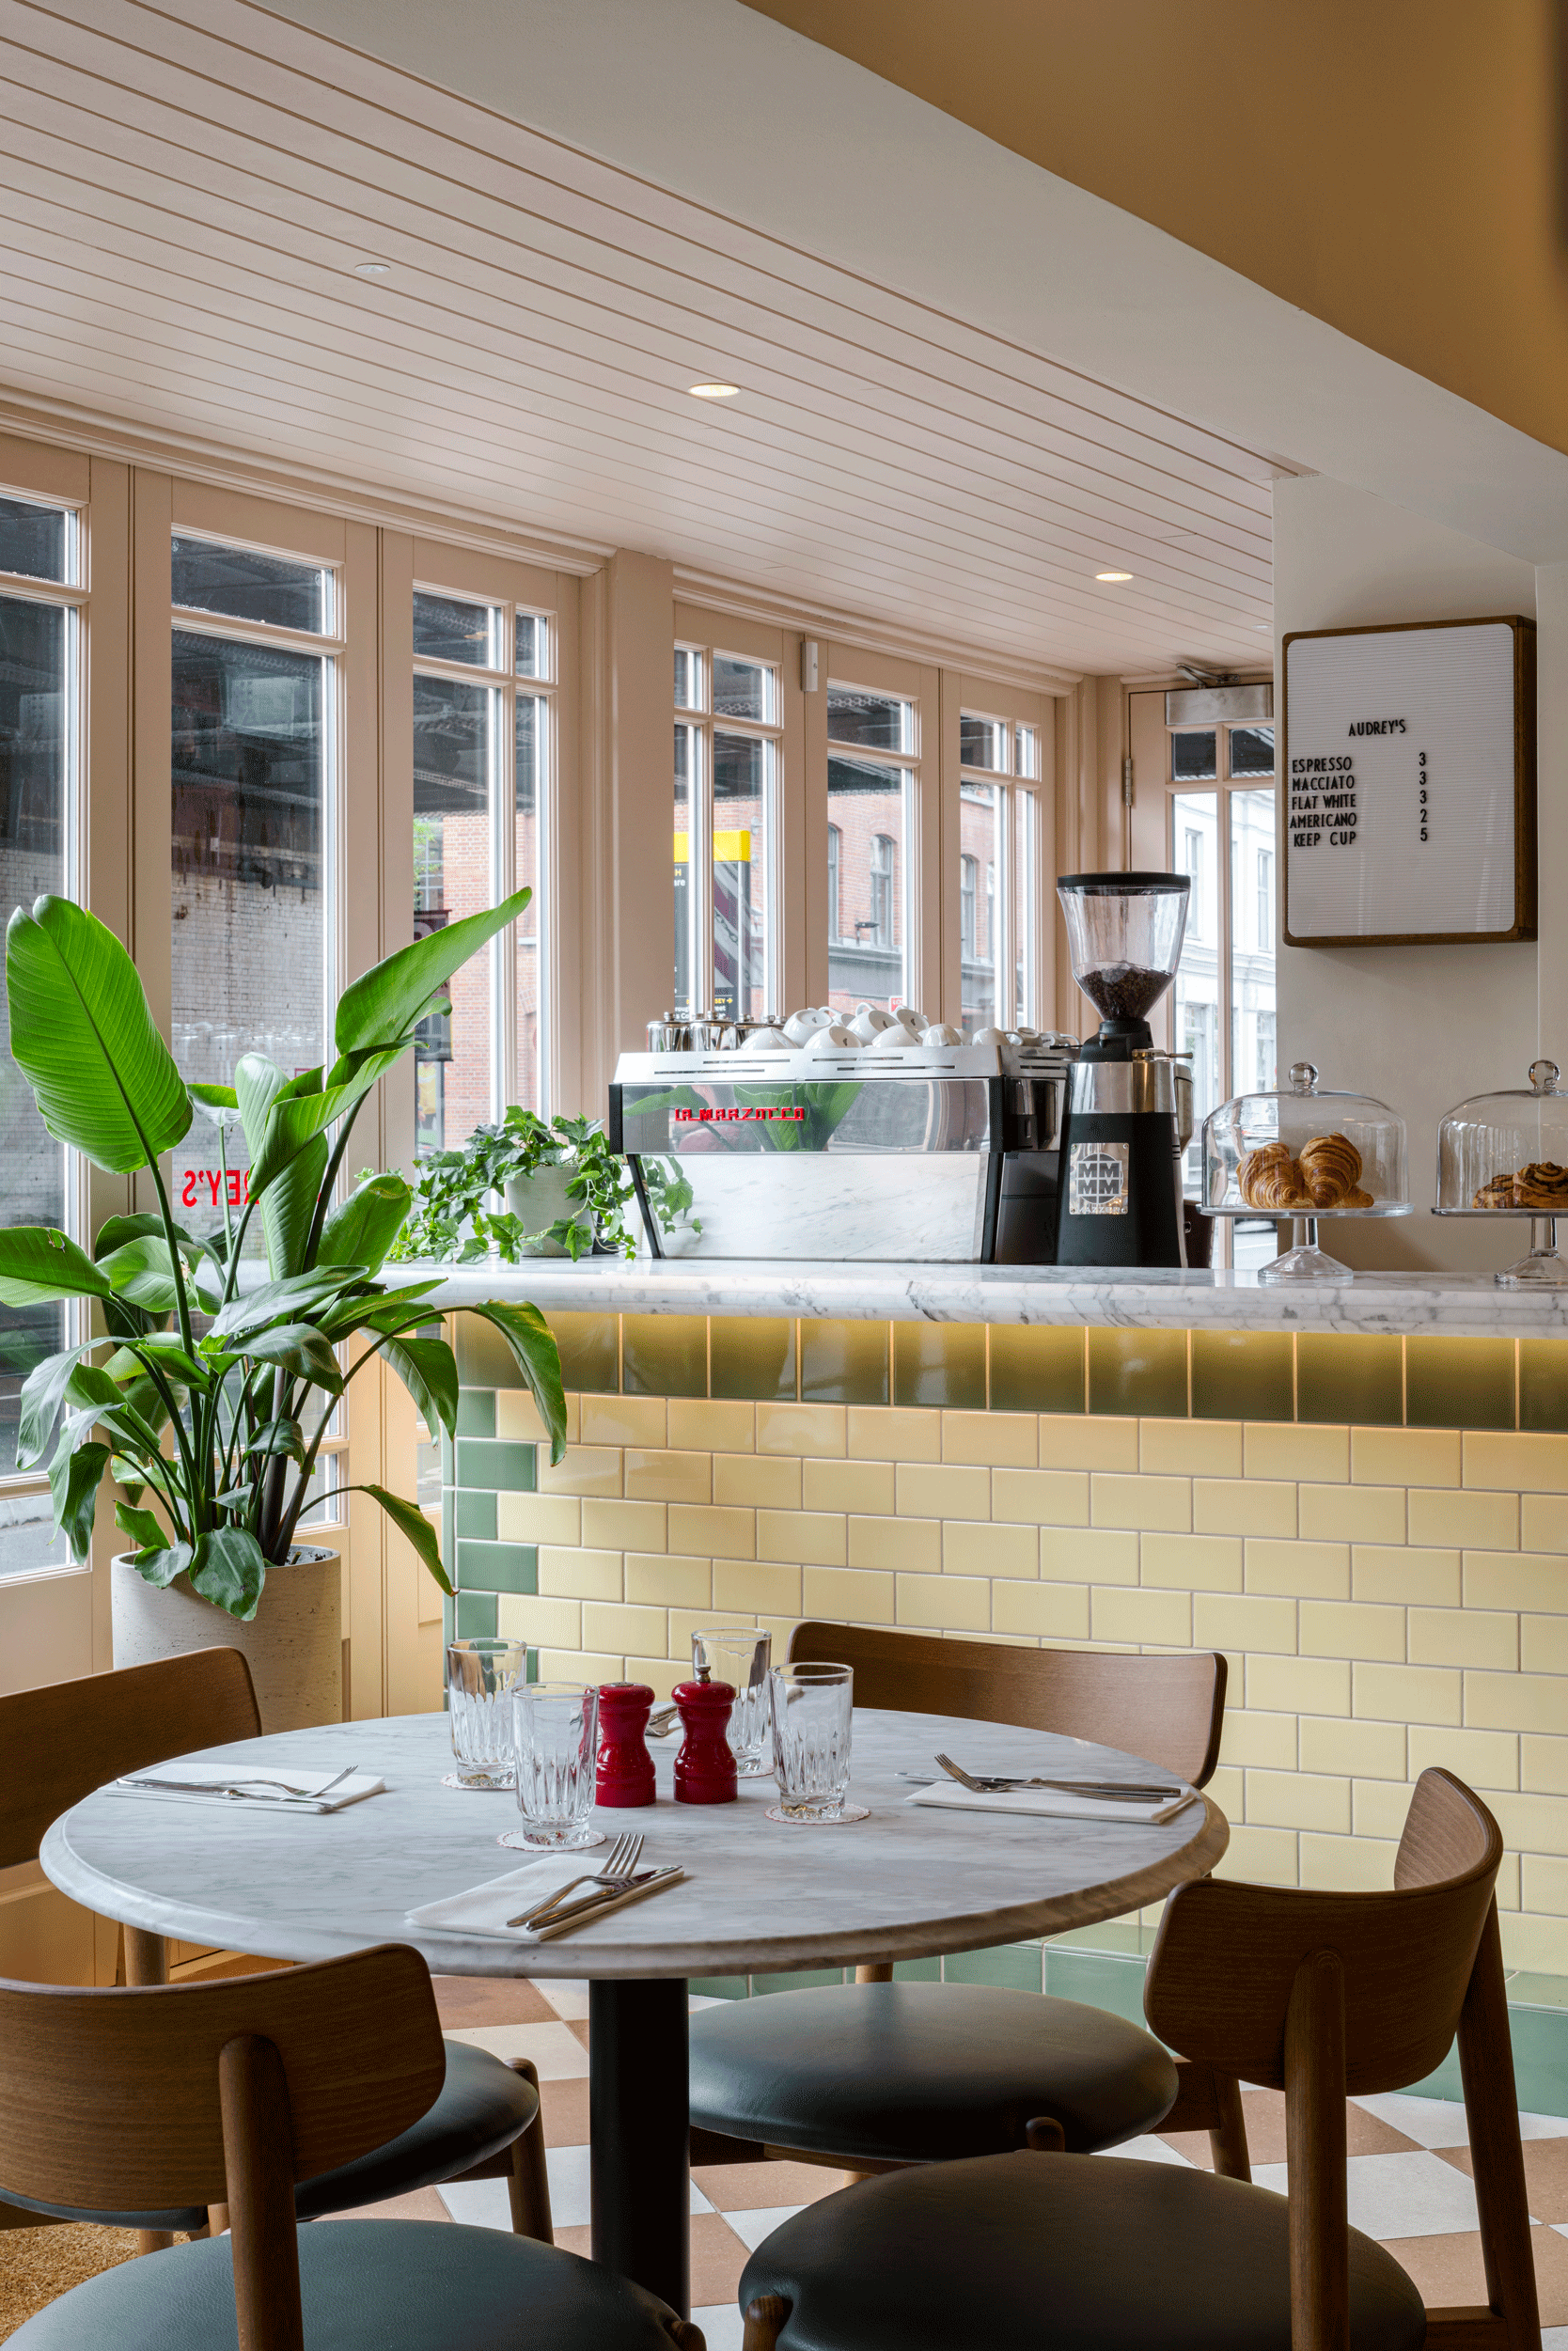 Audrey's Cafe & Bar Borough modern and retro restaurant designed by 3Stories Interior Design and branding creative agency London, featuring victorian inspired tiles, cosy and unpretencious interior